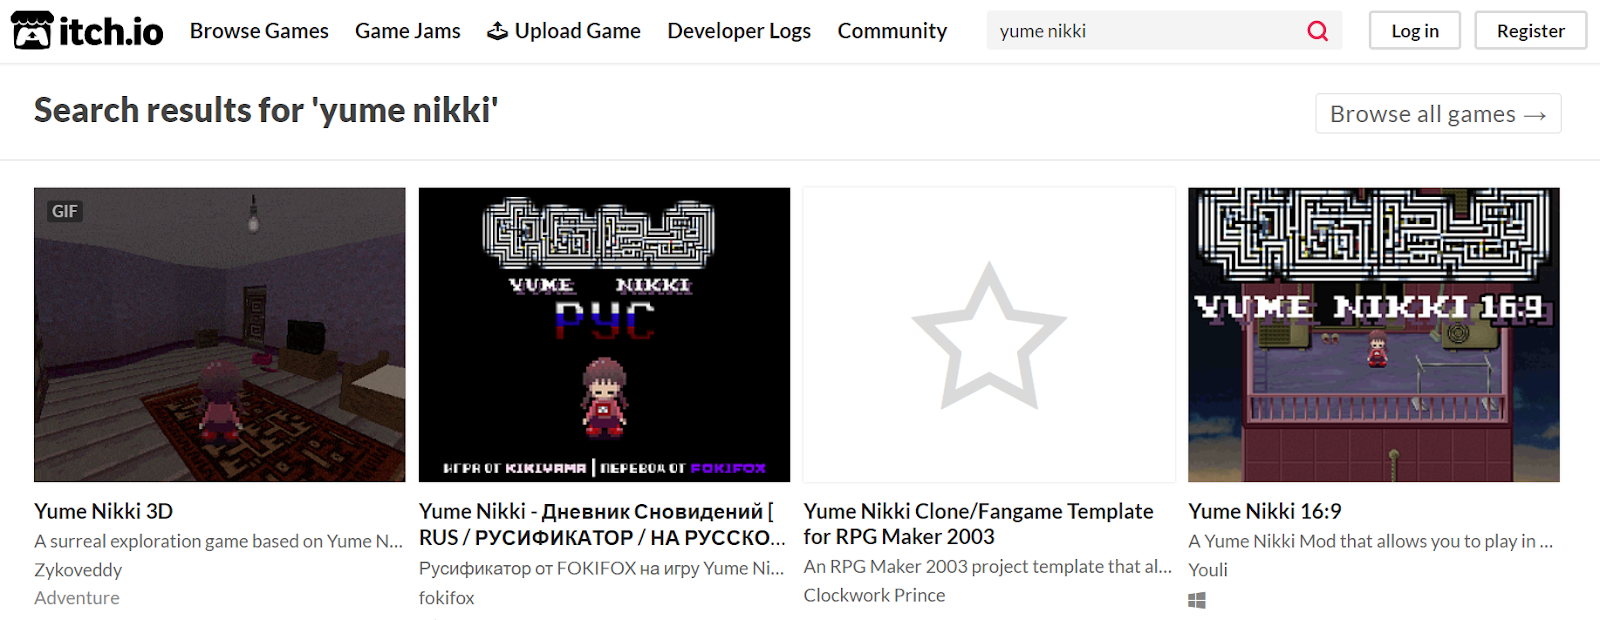 Is yume nikki safe to download